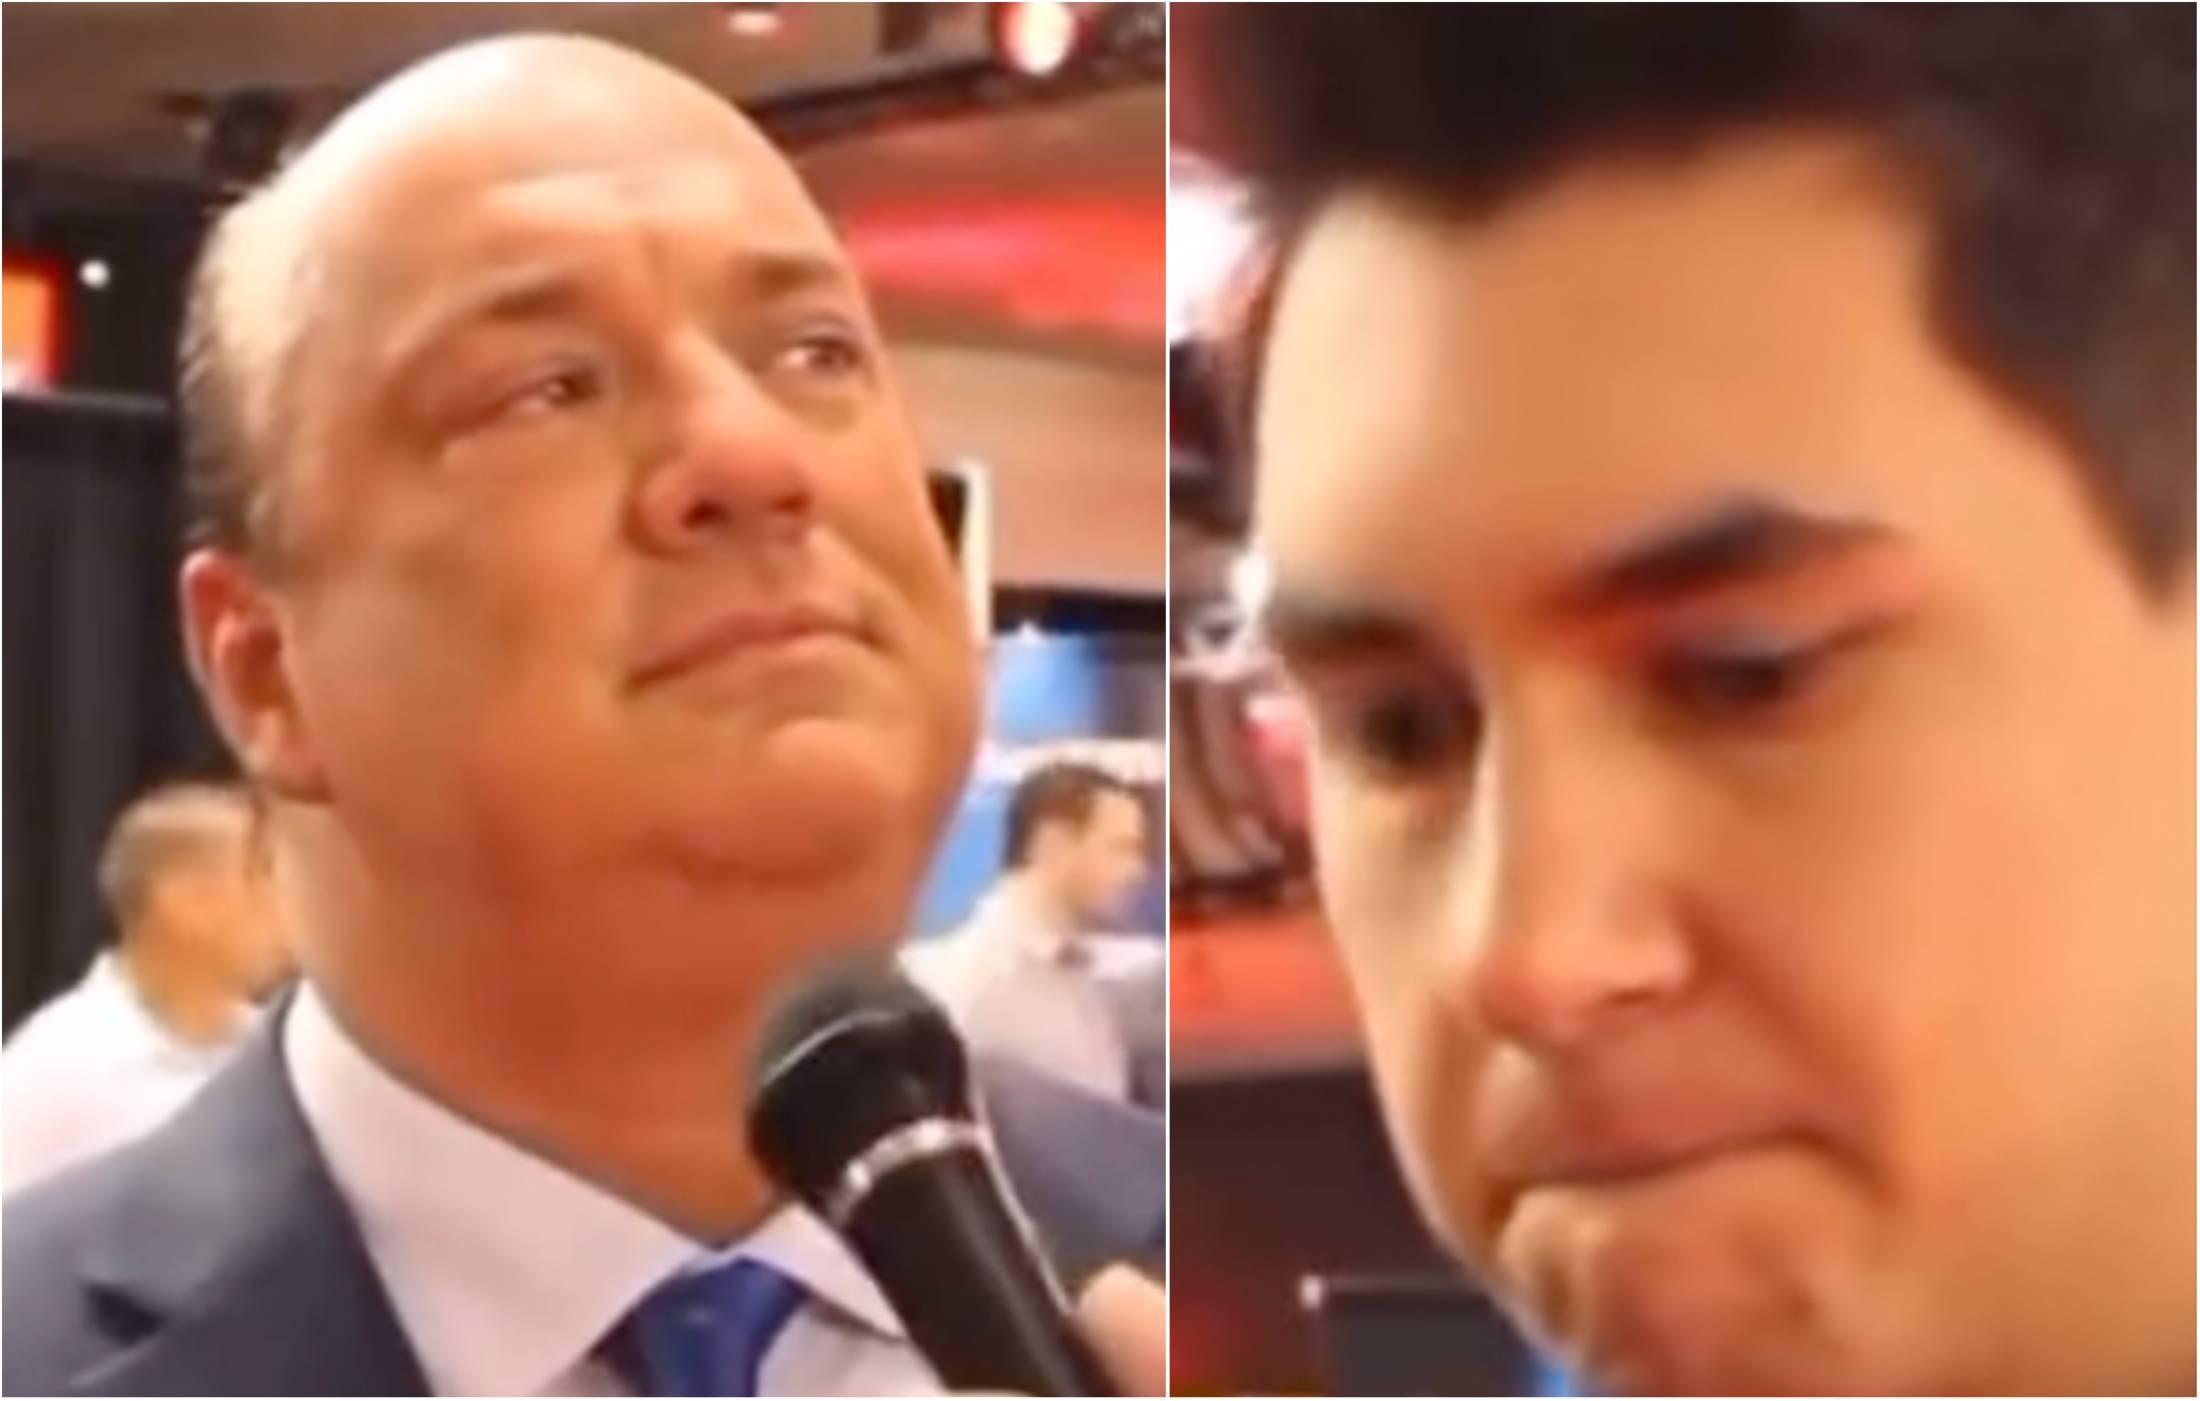 Paul Heyman ruined an interviewer as footage re-emerges